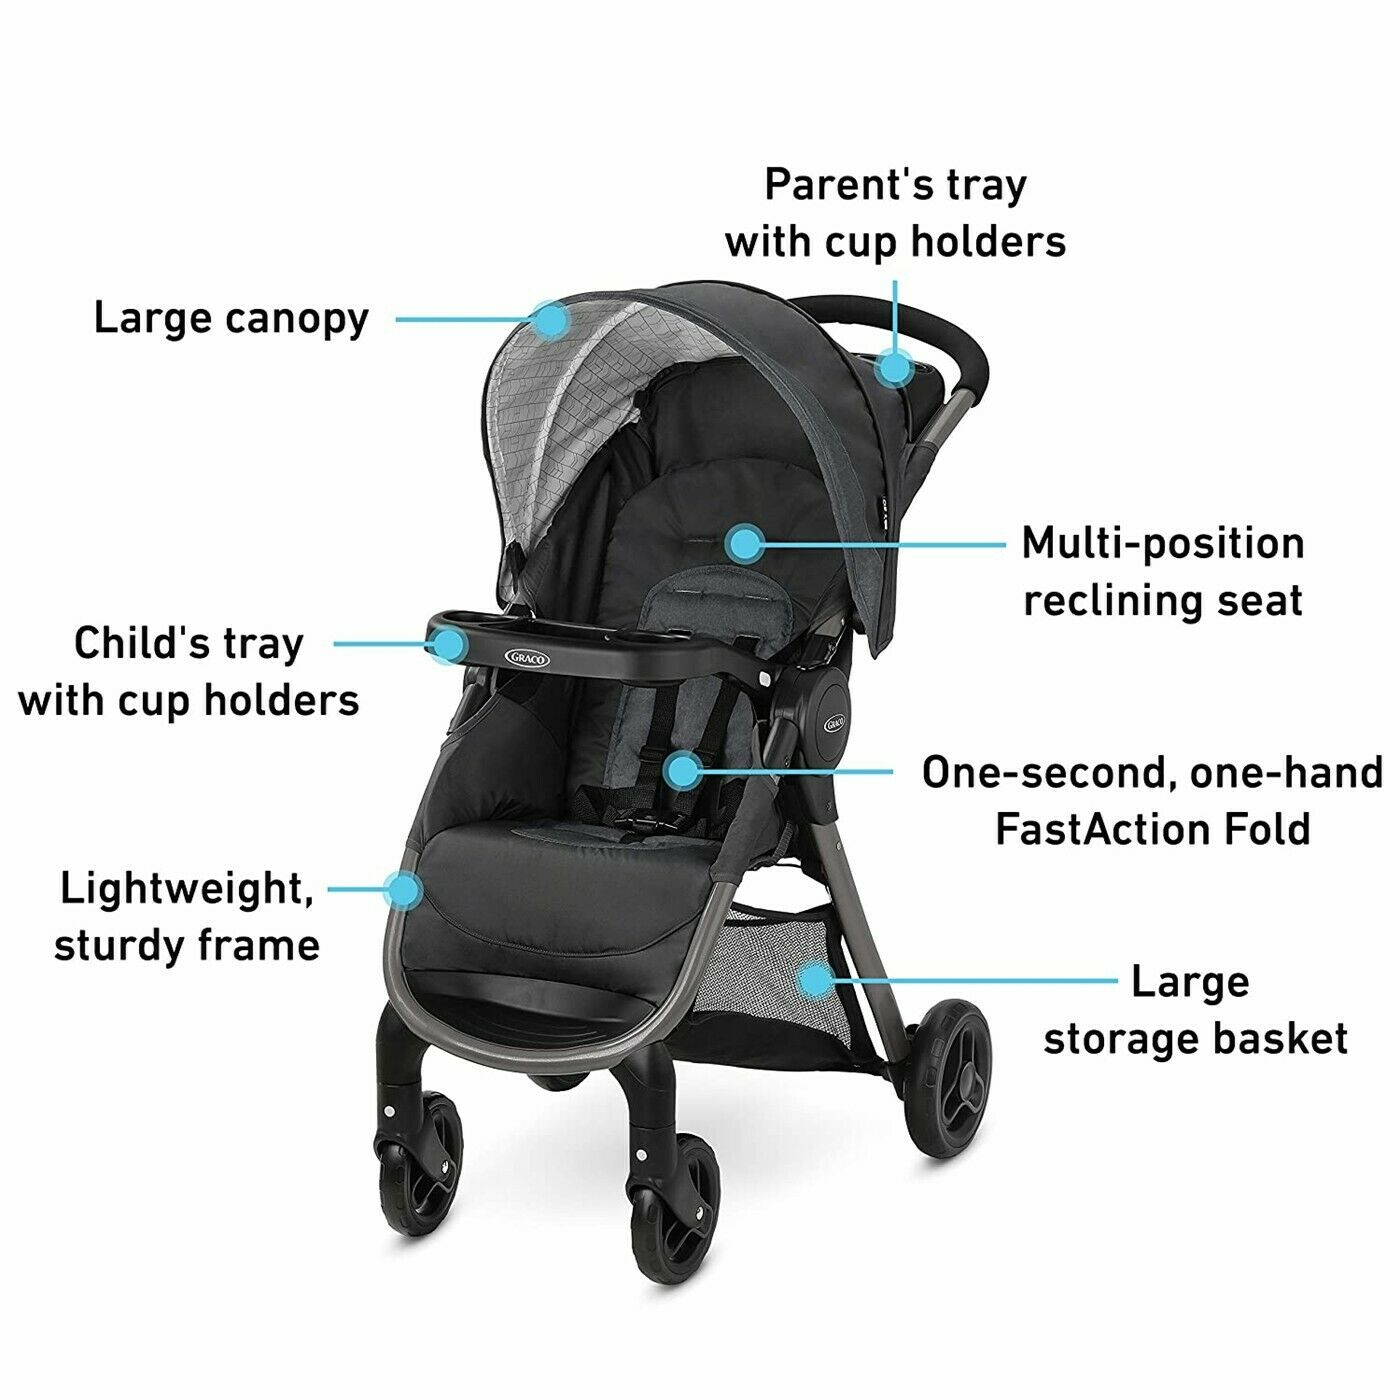 Baby Stroller Travel System with Car Seat Playard High Chair Graco Combo